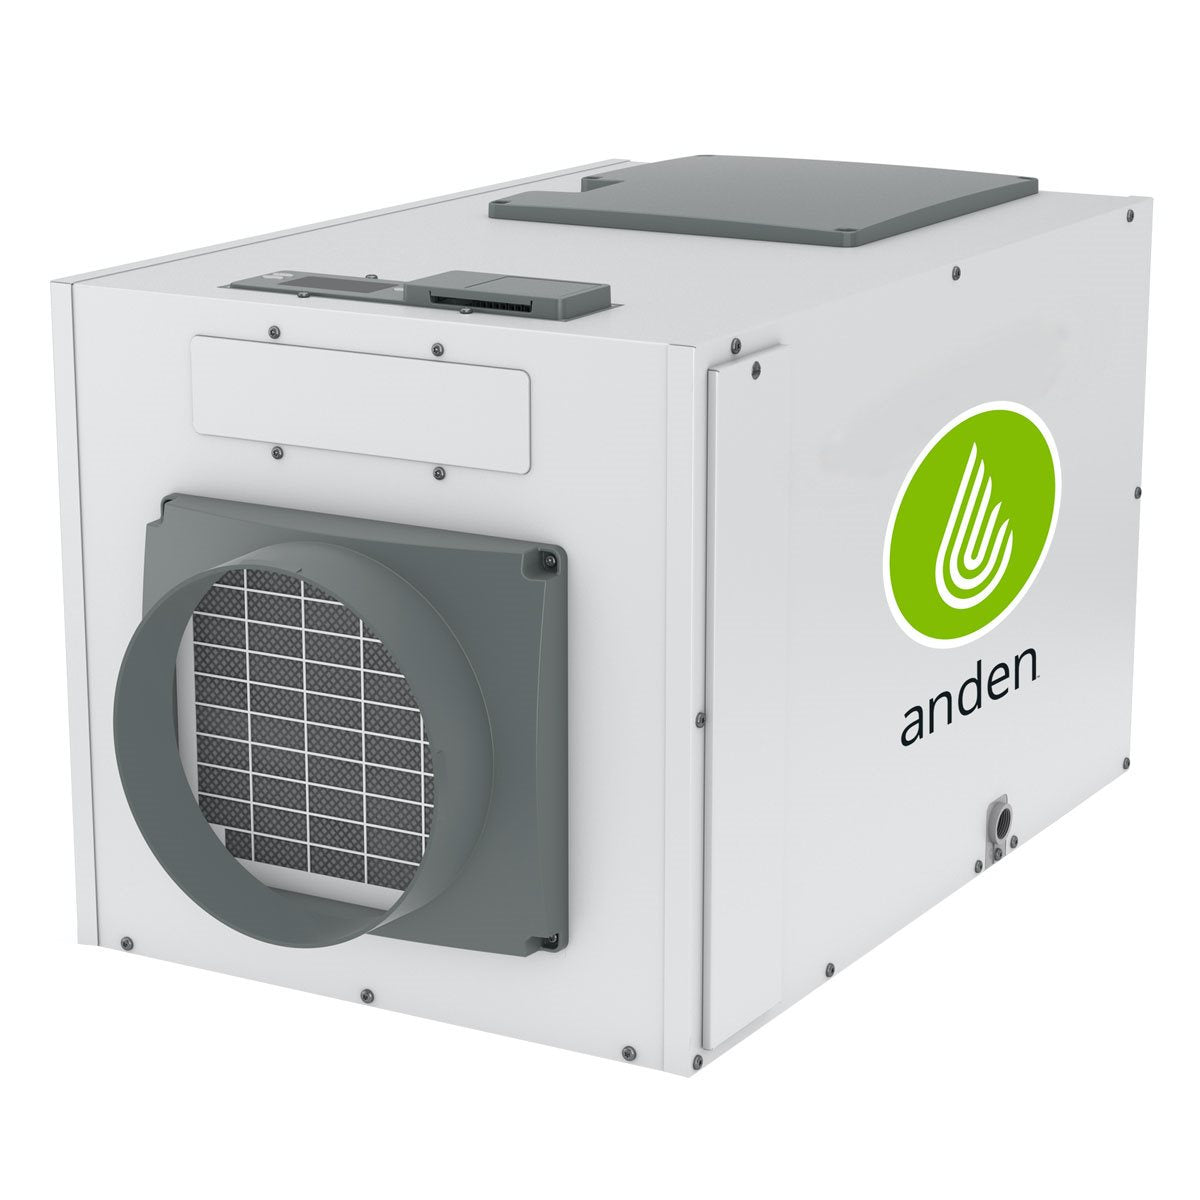 Product Image:Anden 130 Dehumidifier 130 Pints / Day